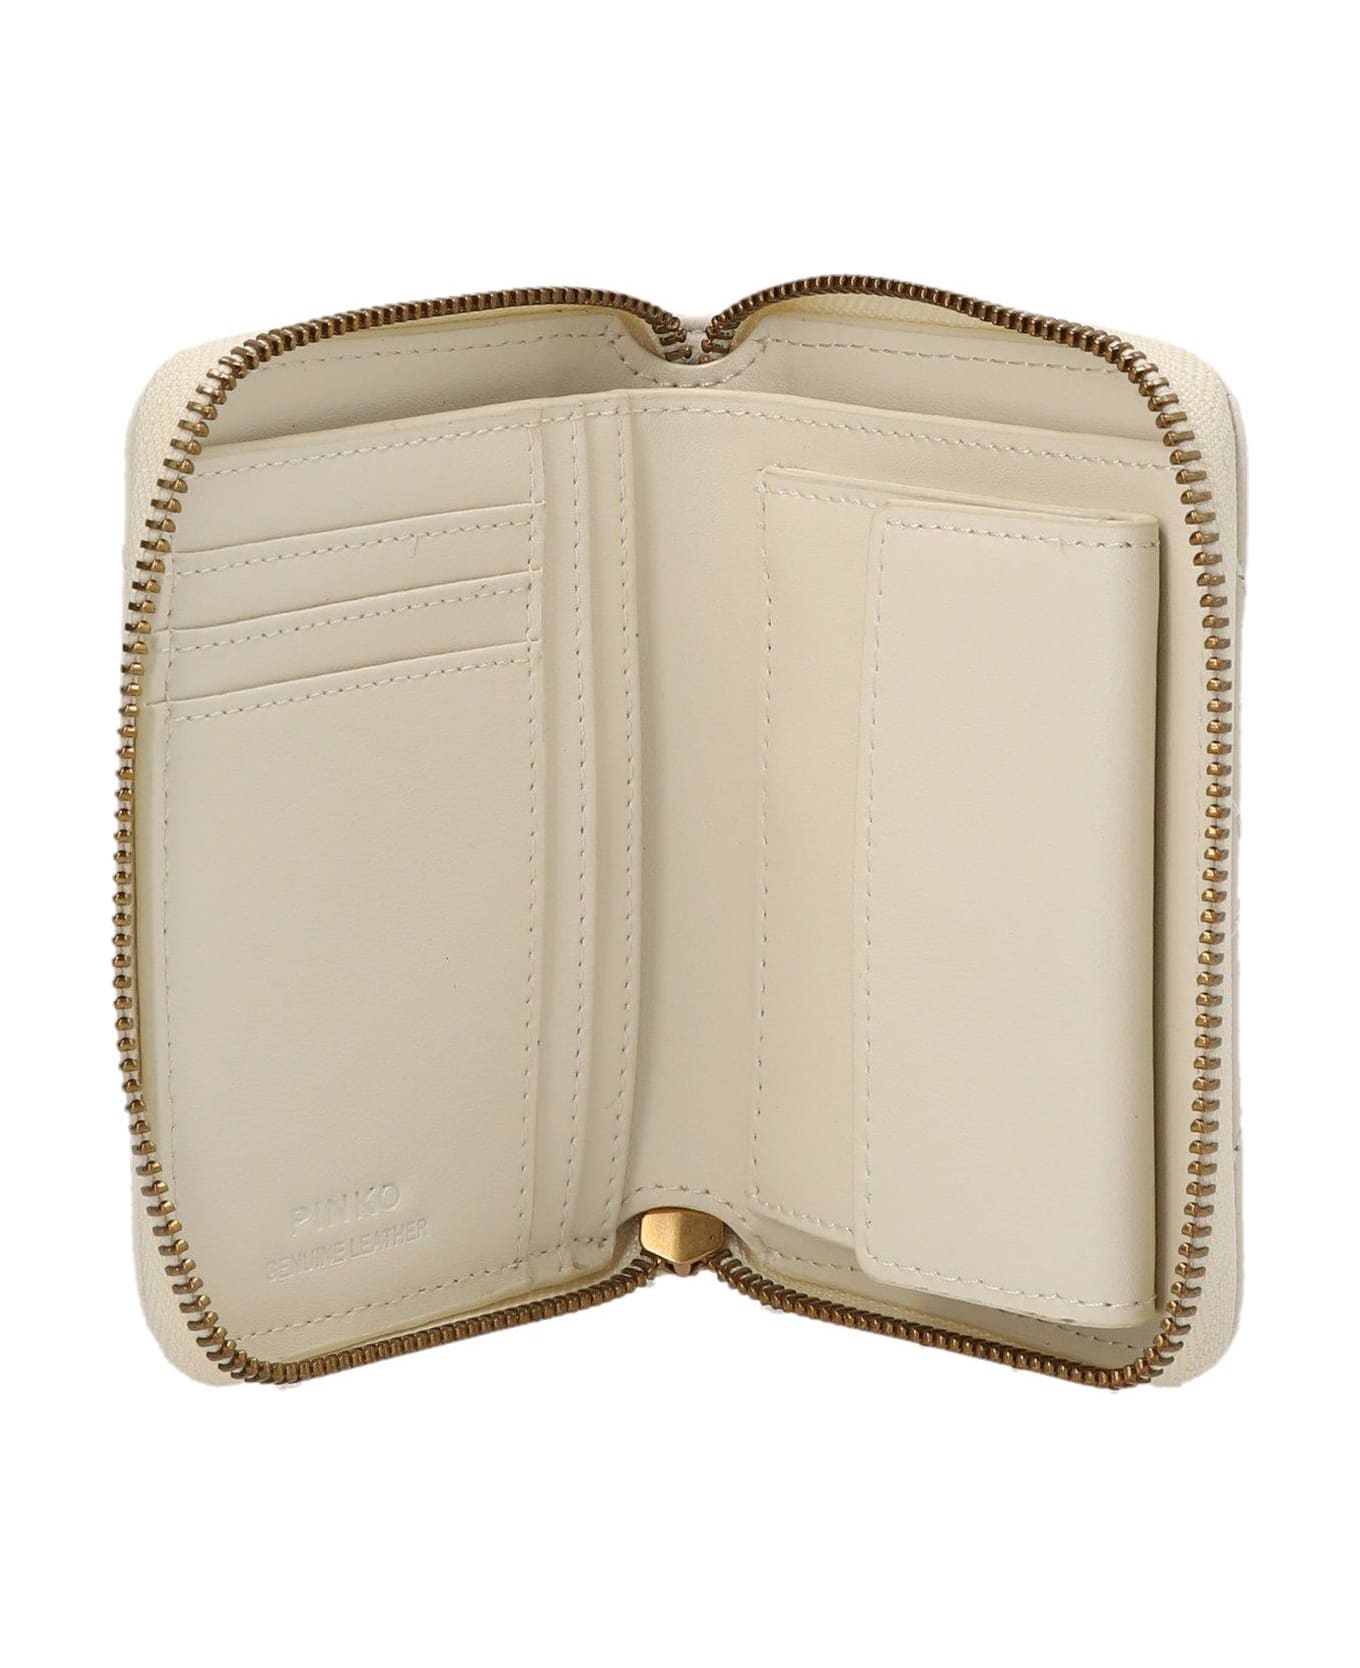 Pinko Logo Plaque Quilted Zipped Wallet - Bianco seta-antique gold